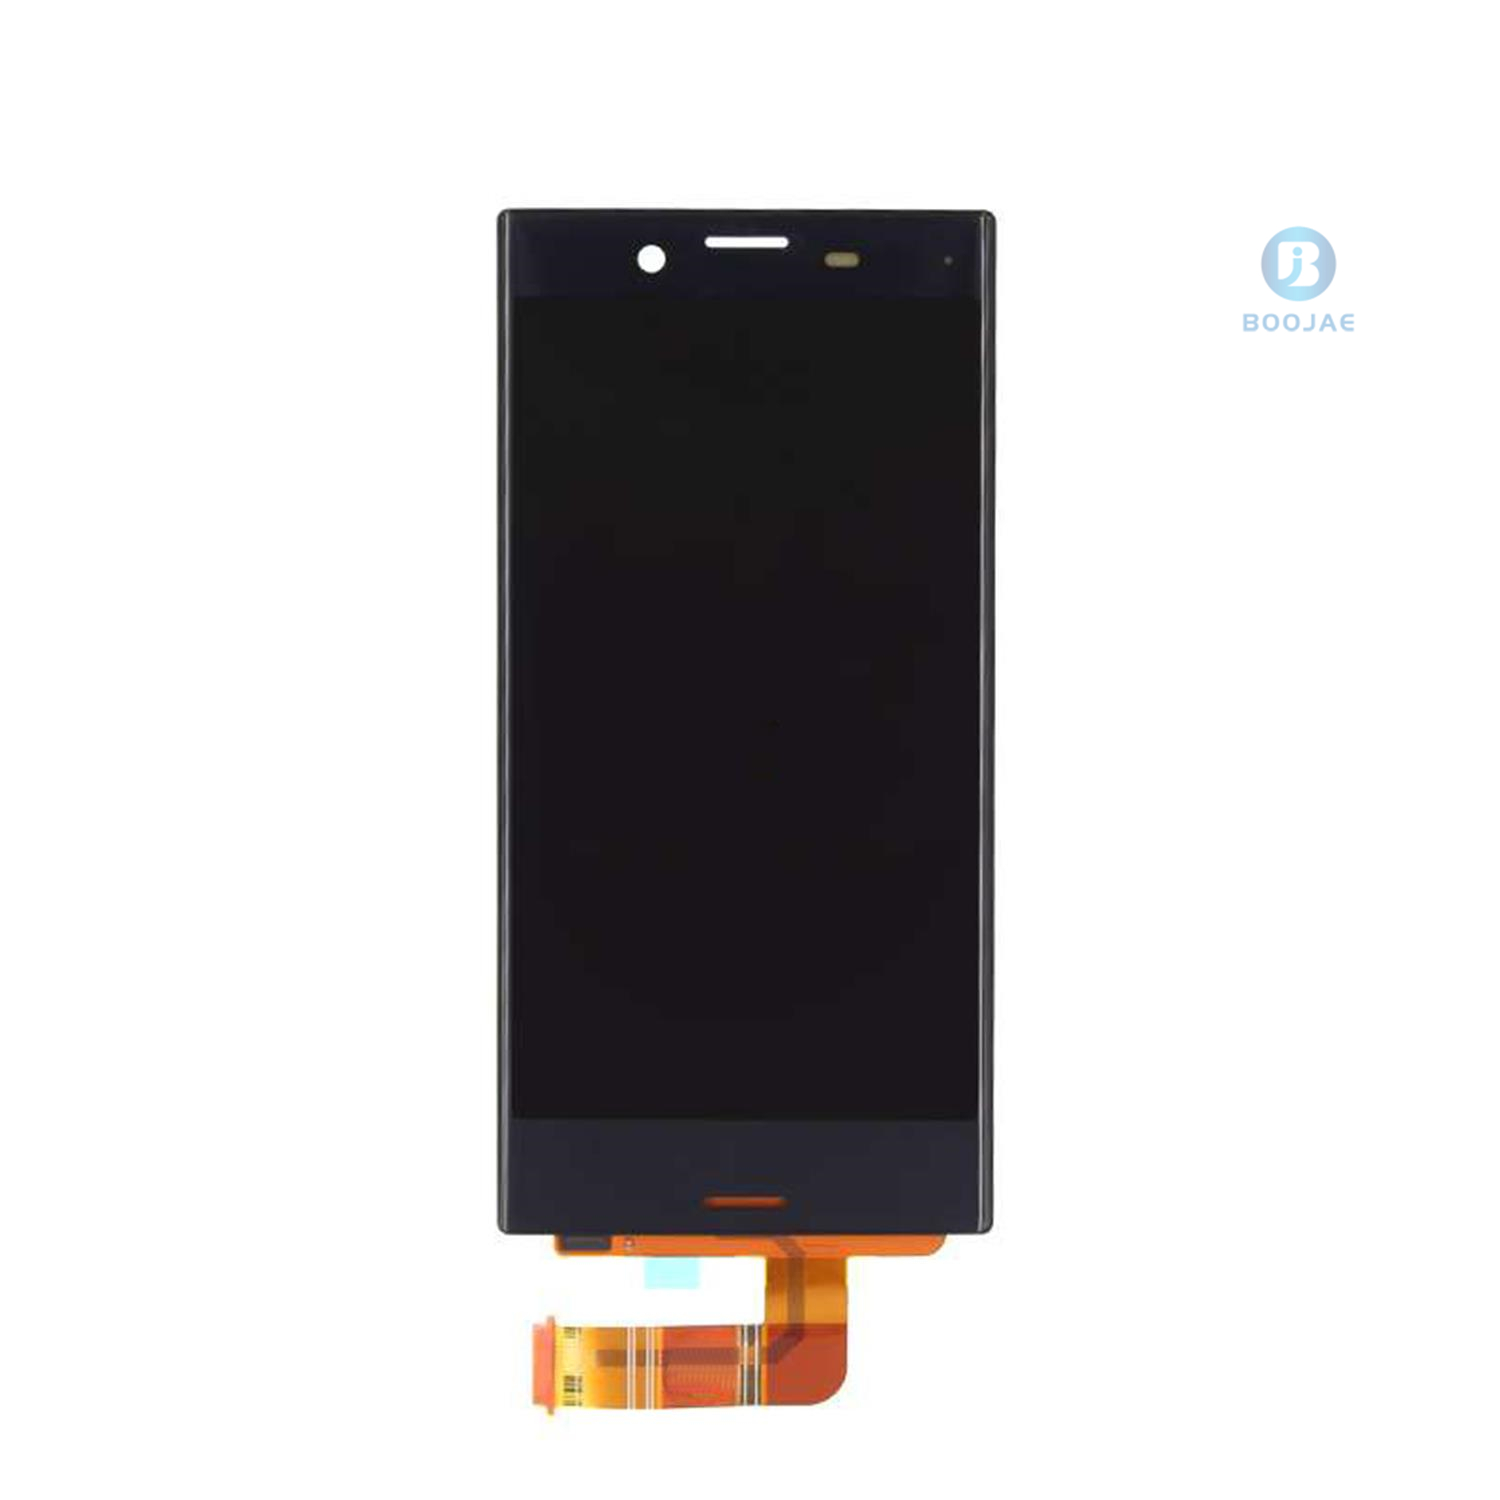 Sony Xperia mini LCD Display With Touch Screen Digitizer Assembly